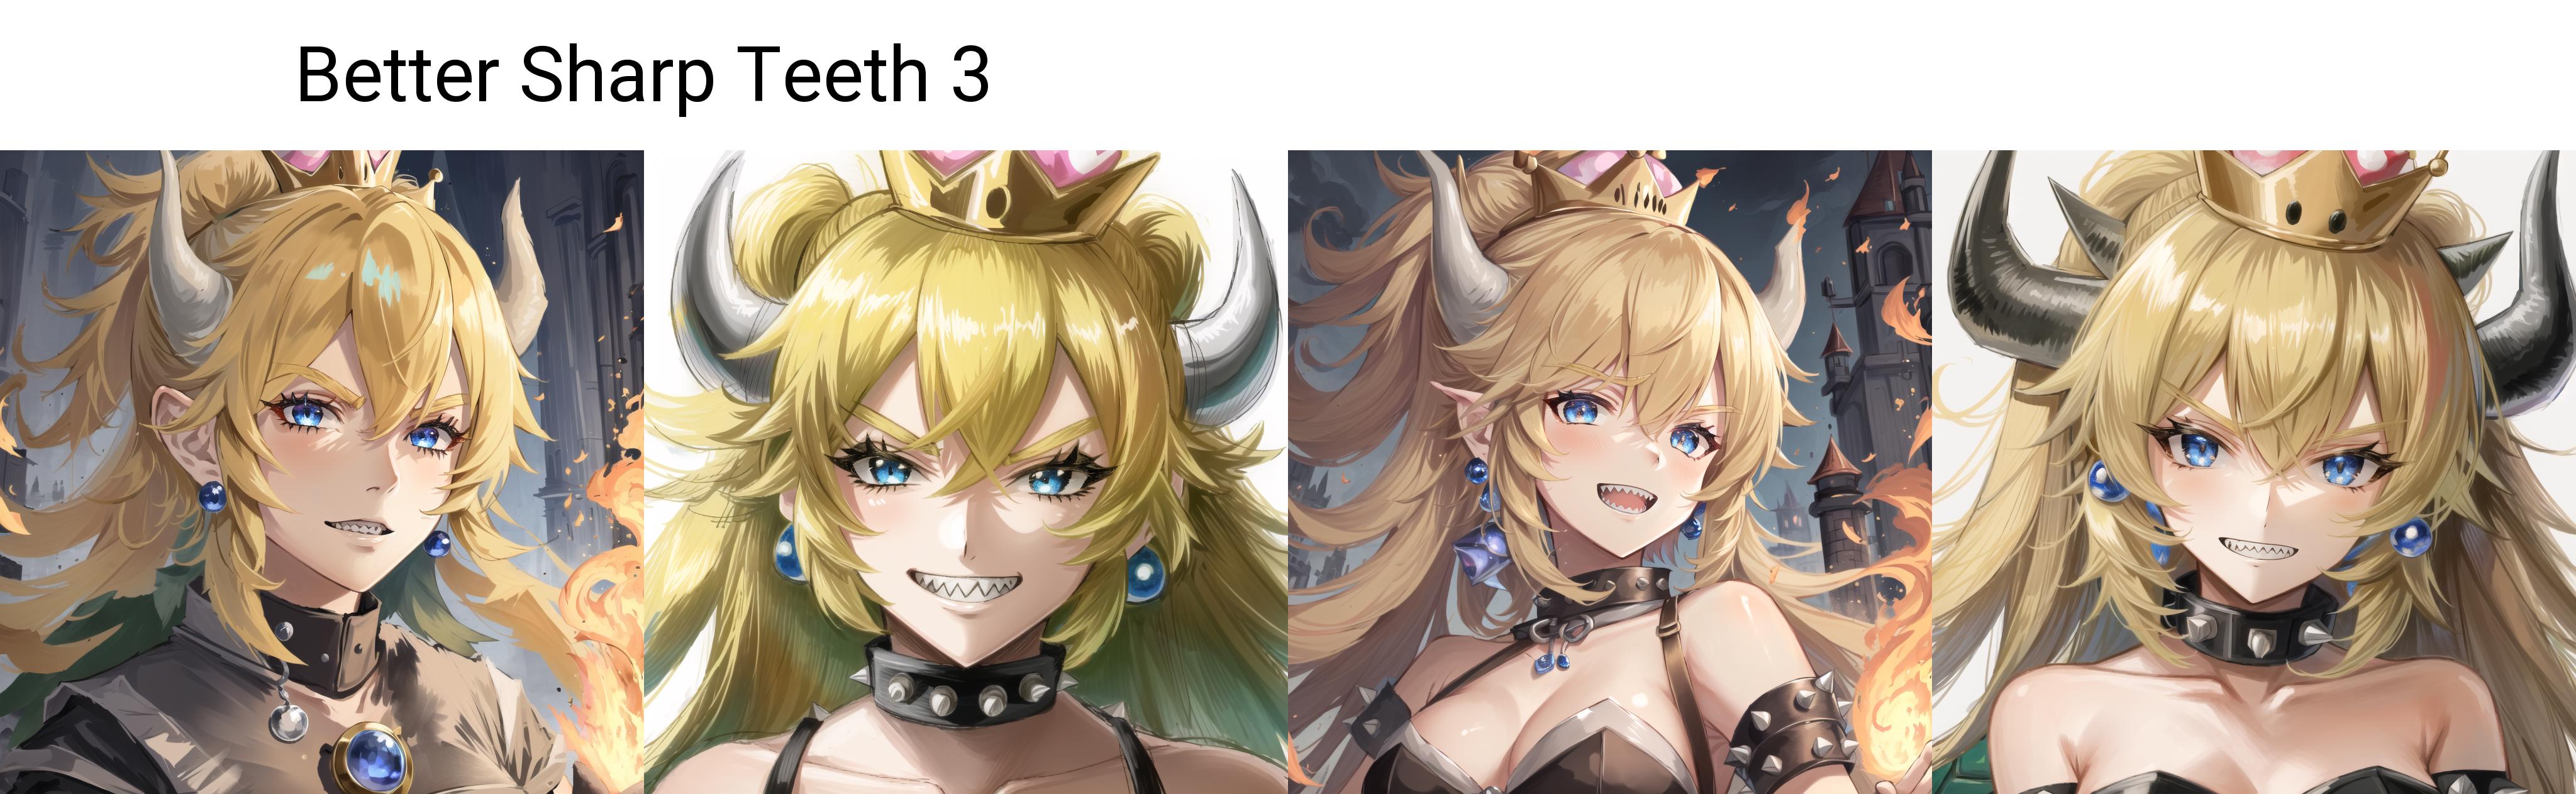 Bowsette | Character Lora 1860 image by worgensnack